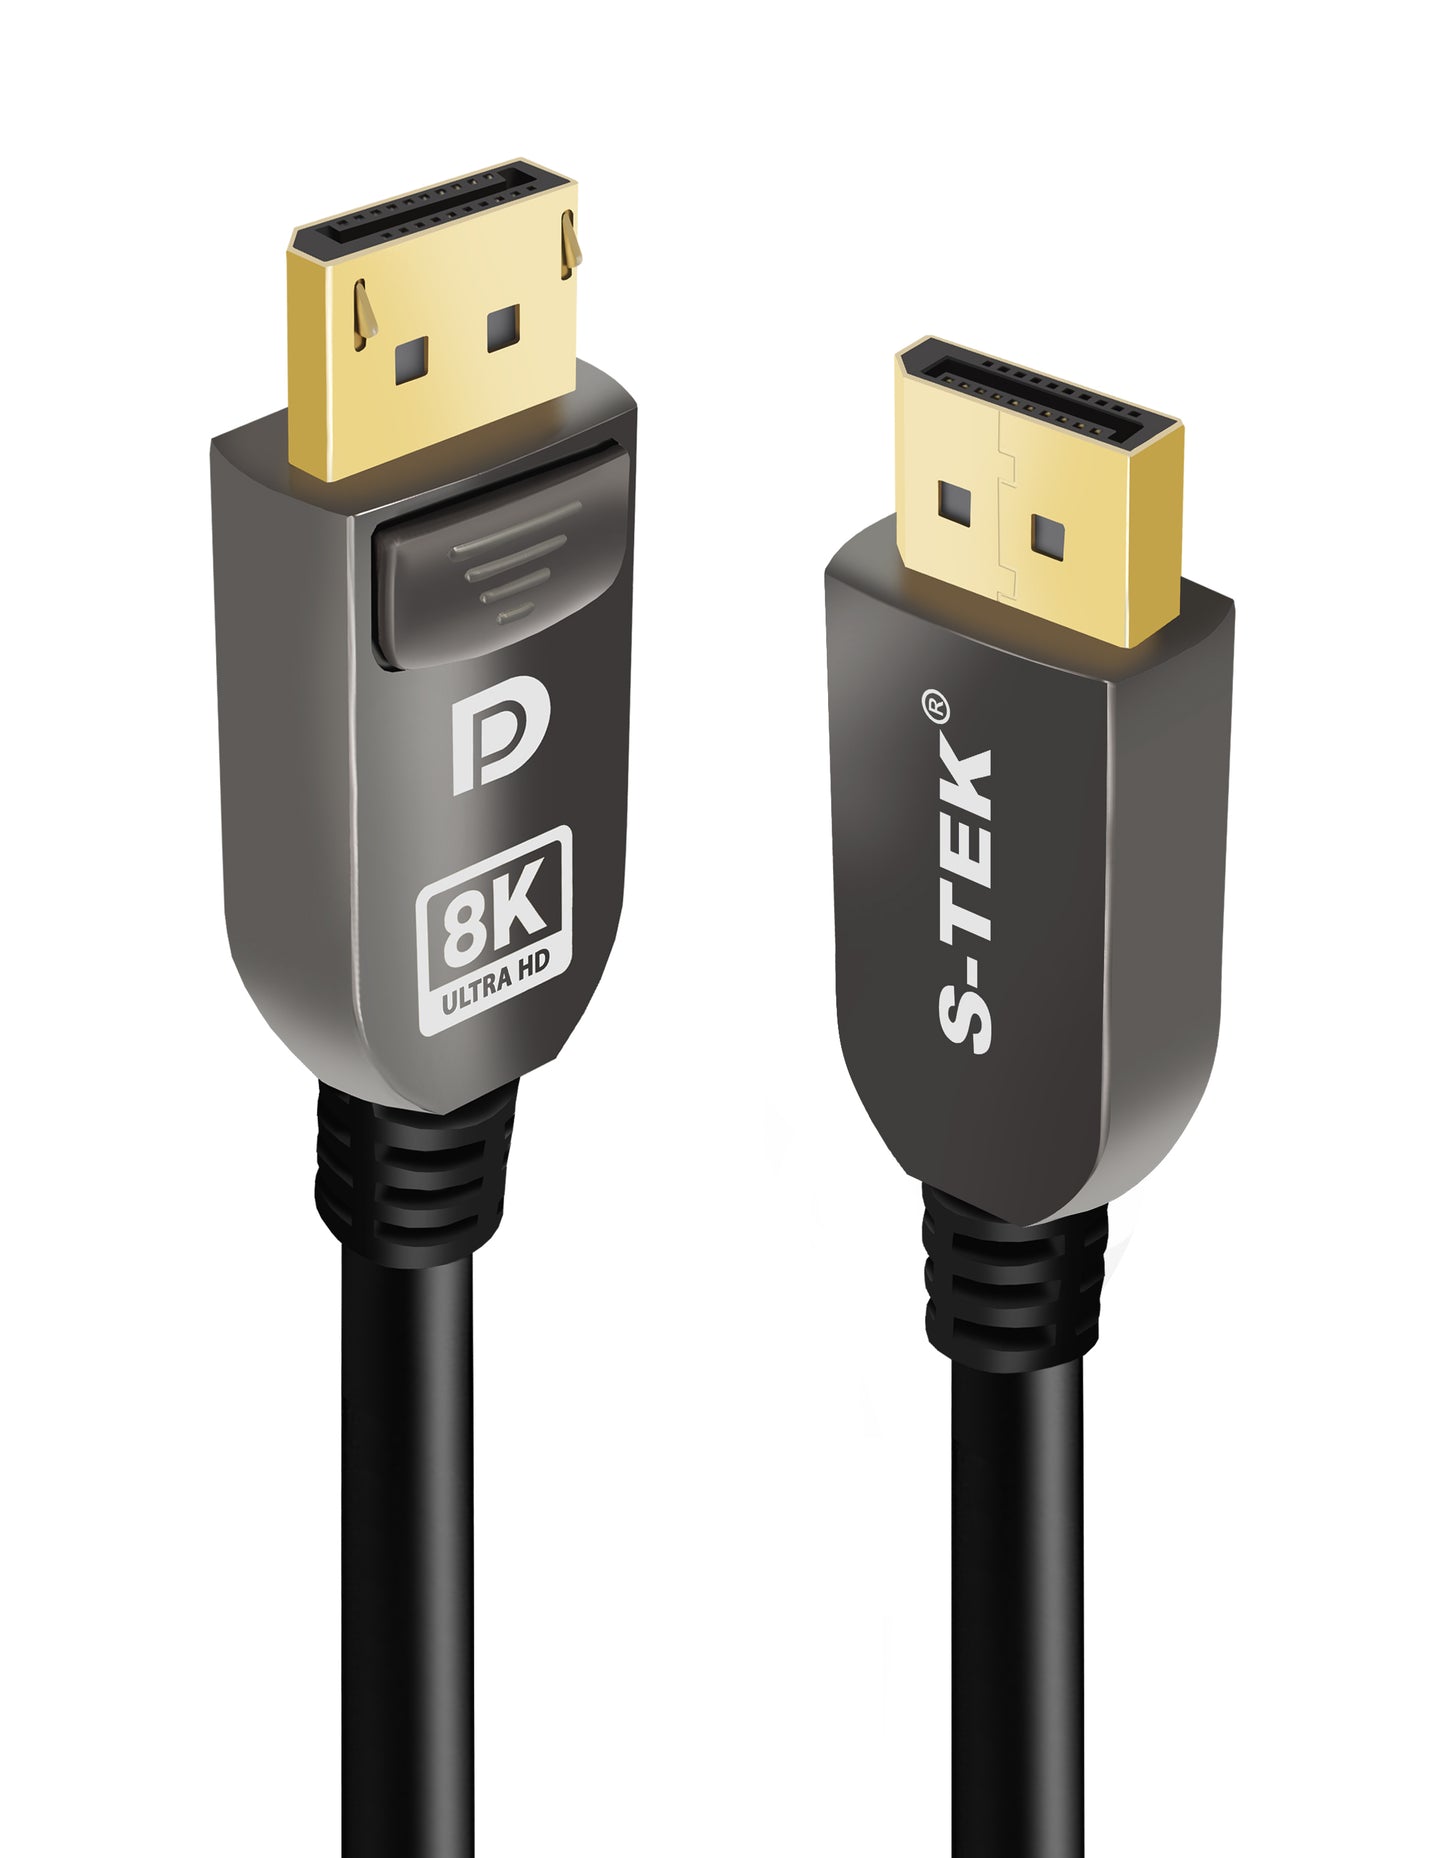 S-TEK 8K DisplayPort Ultra HD Cable DisplayPort Male to Male, Supports 7680x4320 Resolution, 8K @ 60 Hz, 4K @144 Hz, 2K 165 Hz HDP DSC 1.2 HDCP for Gaming Laptop Monitor